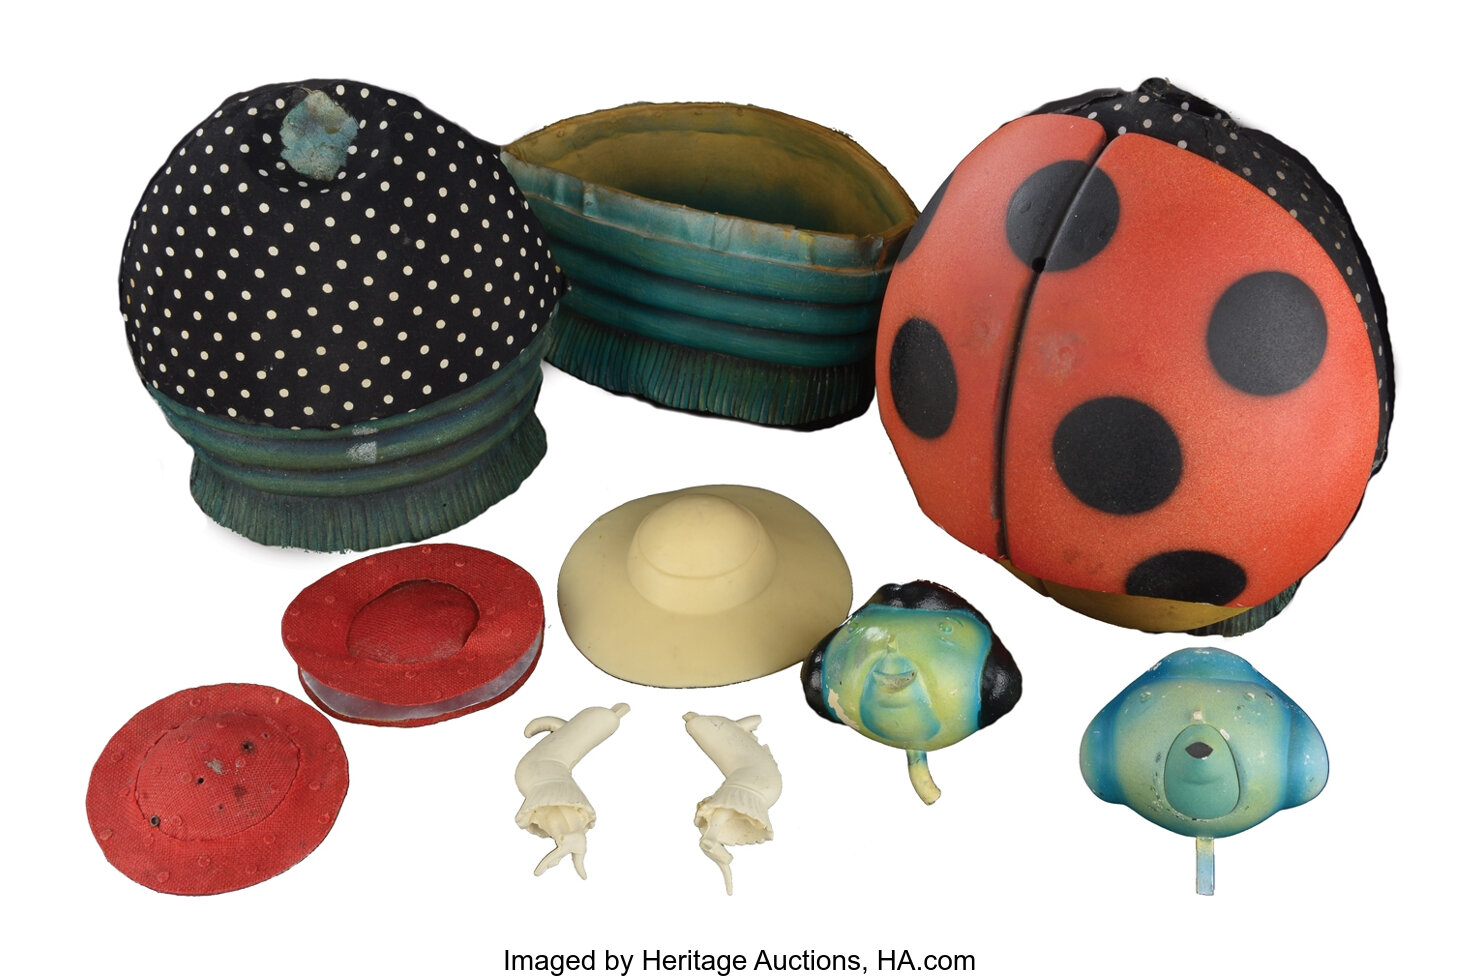 Ladybug Mask for James and the Giant Peach by